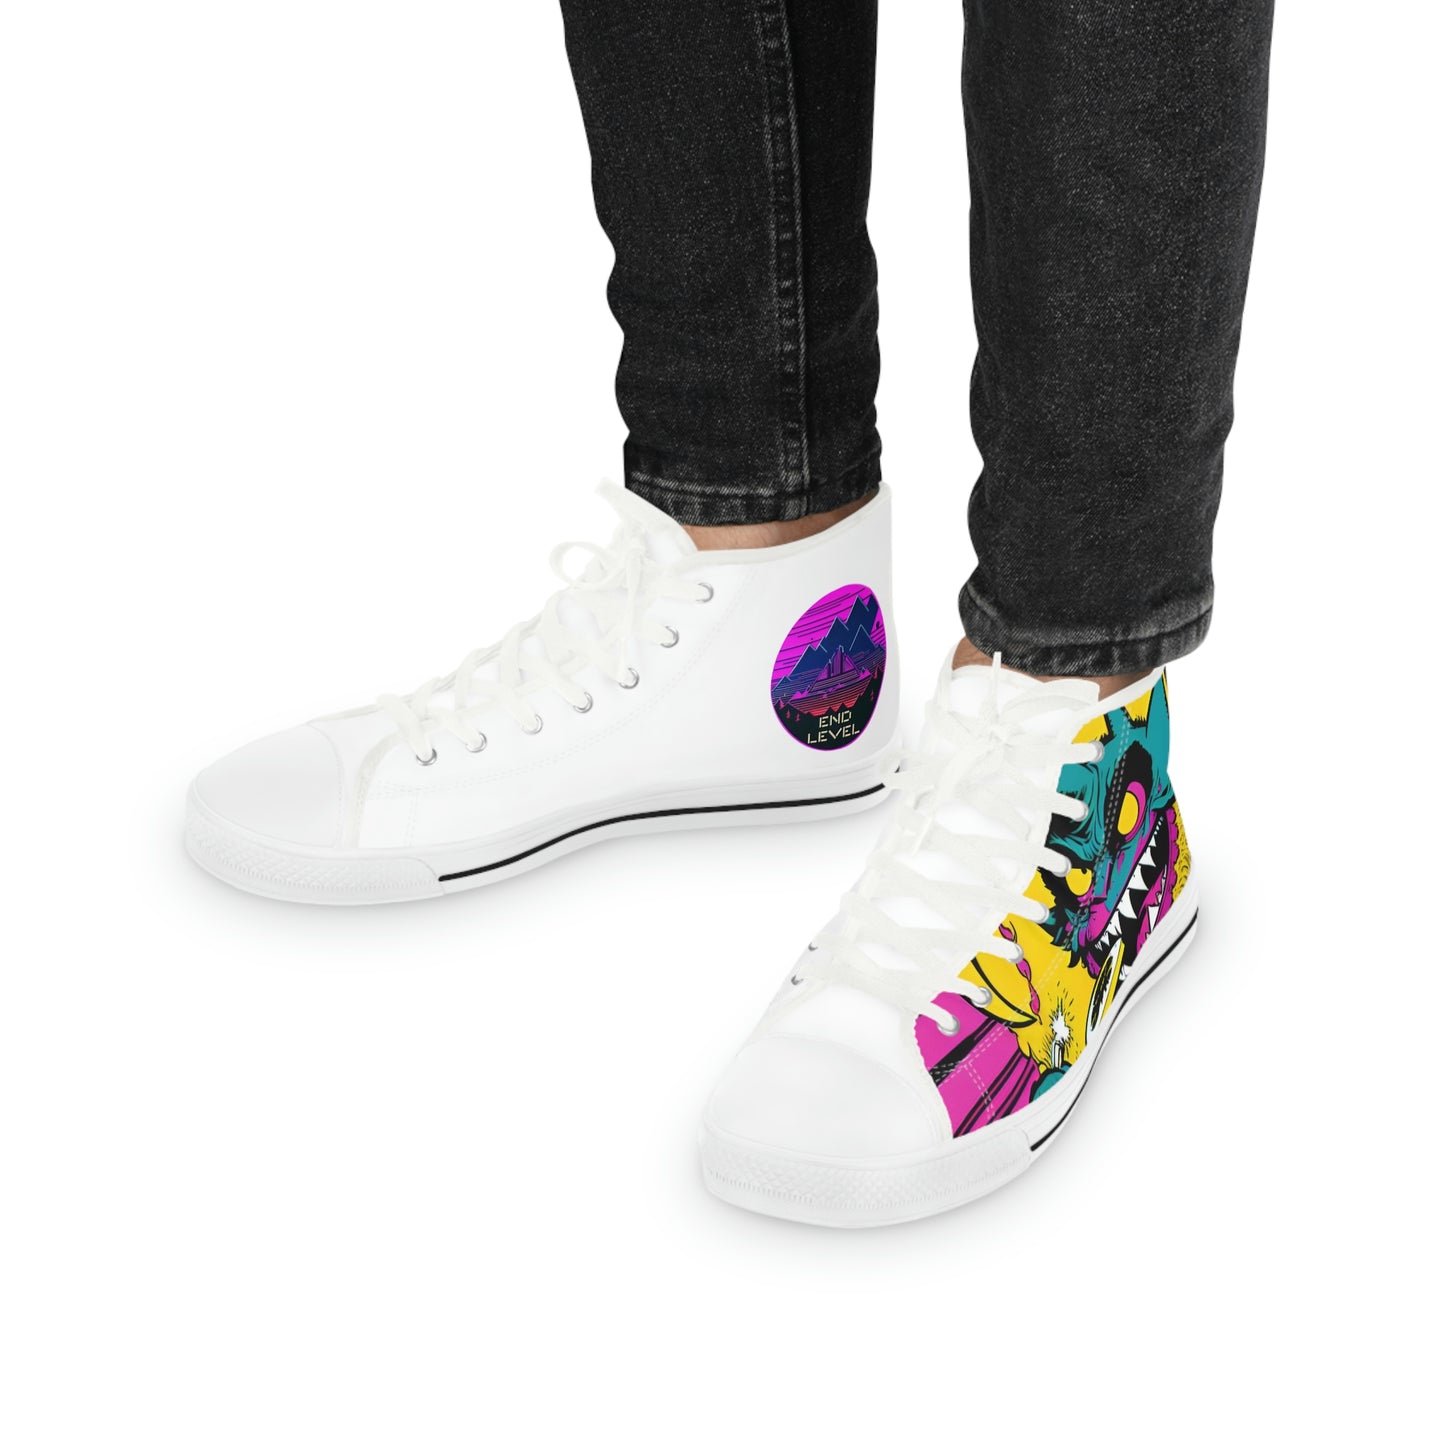 Sweet and Sour design canvas sneakers with white laces on a person.